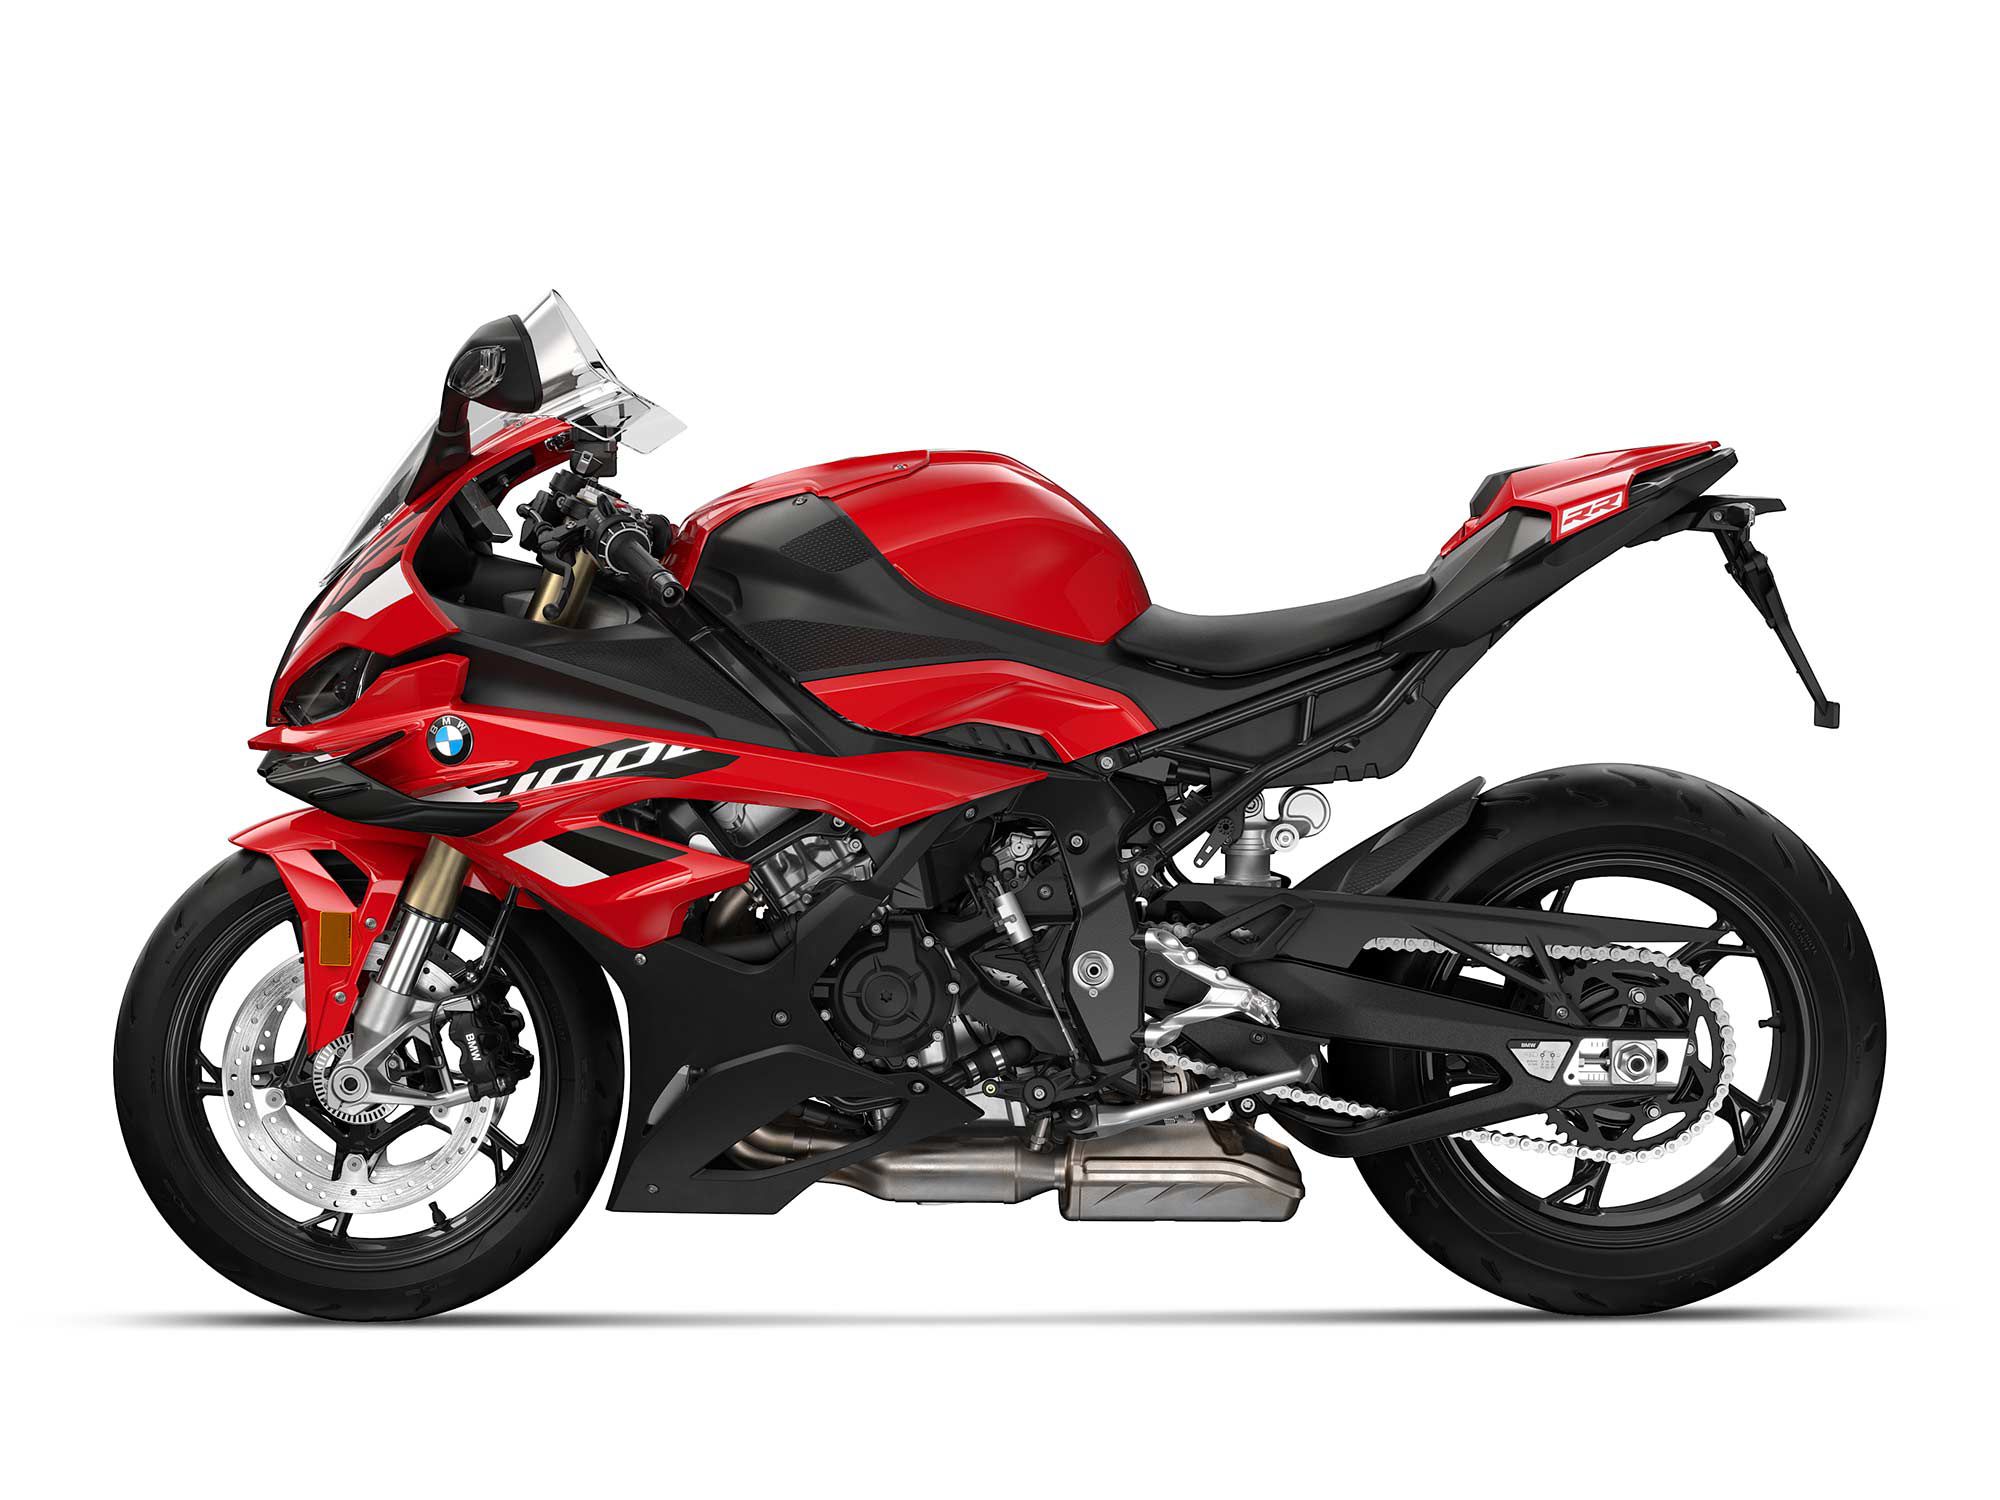 2023 BMW S 1000 RR in Racing Red.